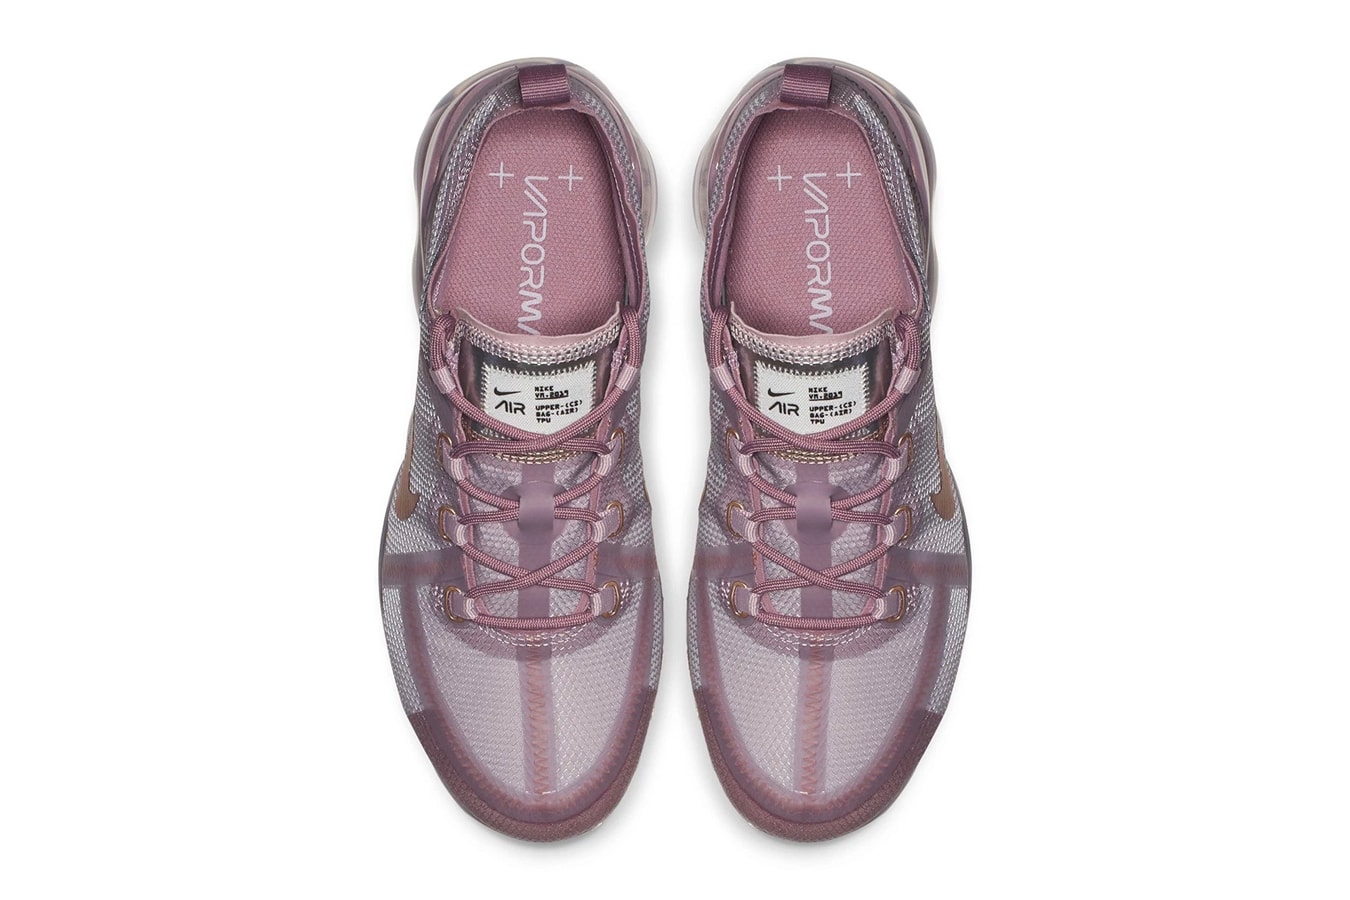 Nike Air VaporMax 2019 pink first look 2019 release info sneakers 